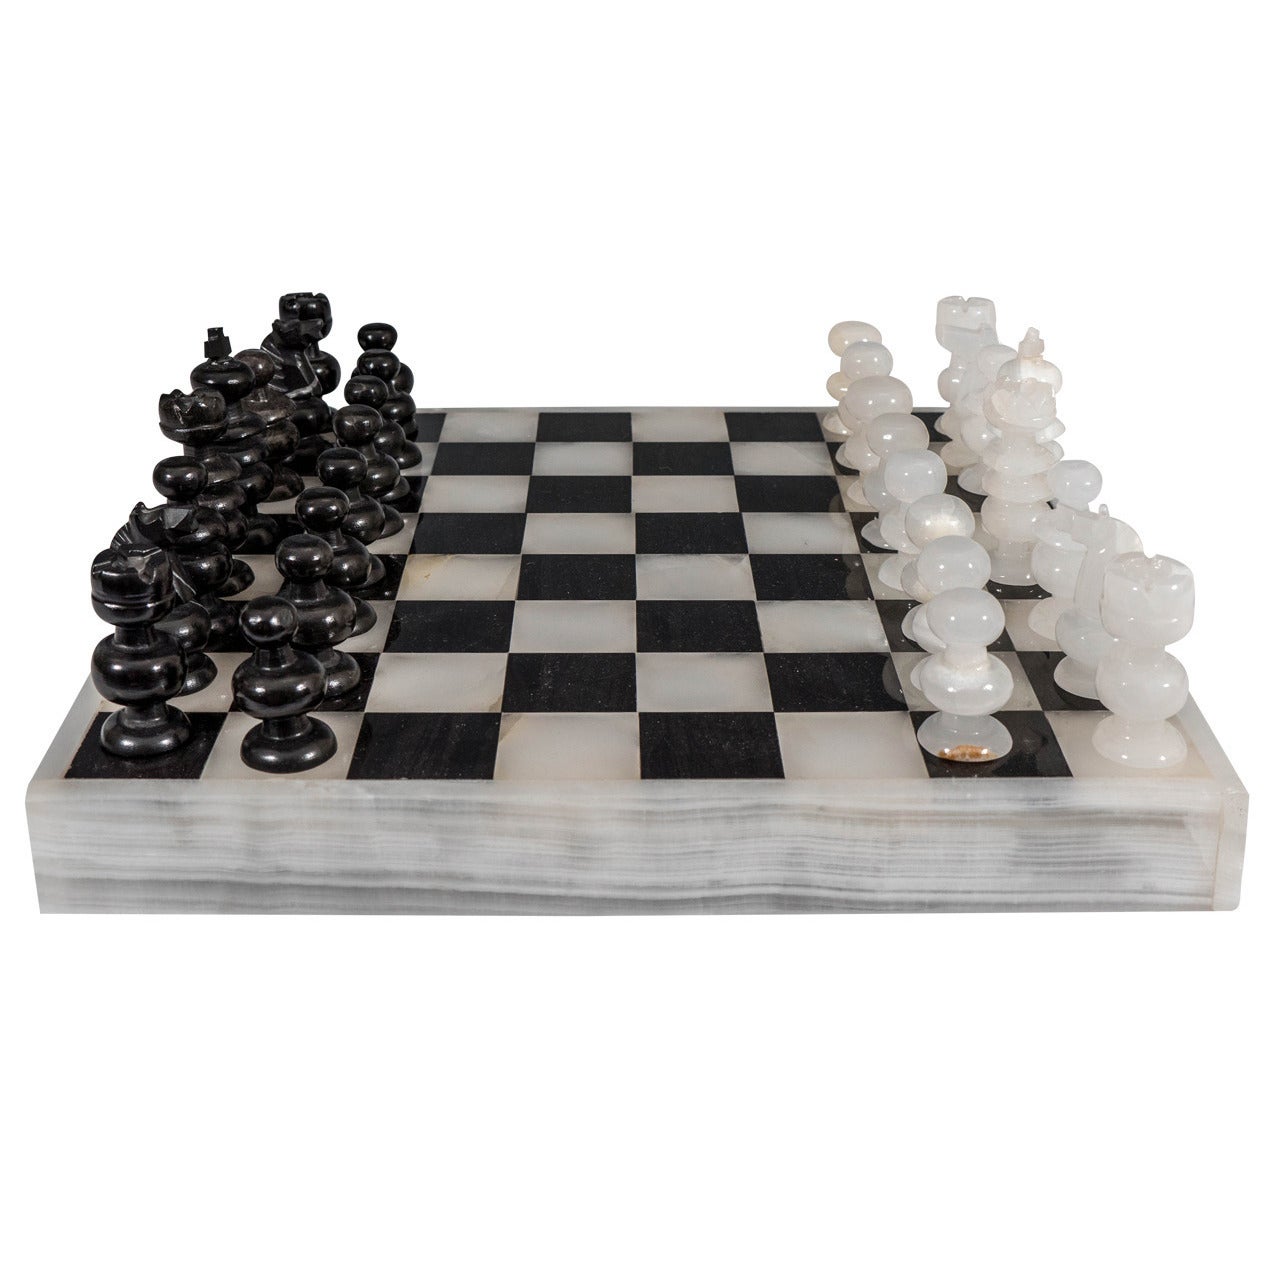 Italian Black and White Marble and Onyx Chess, Backgammon, and Tic-Tac-Toe Set